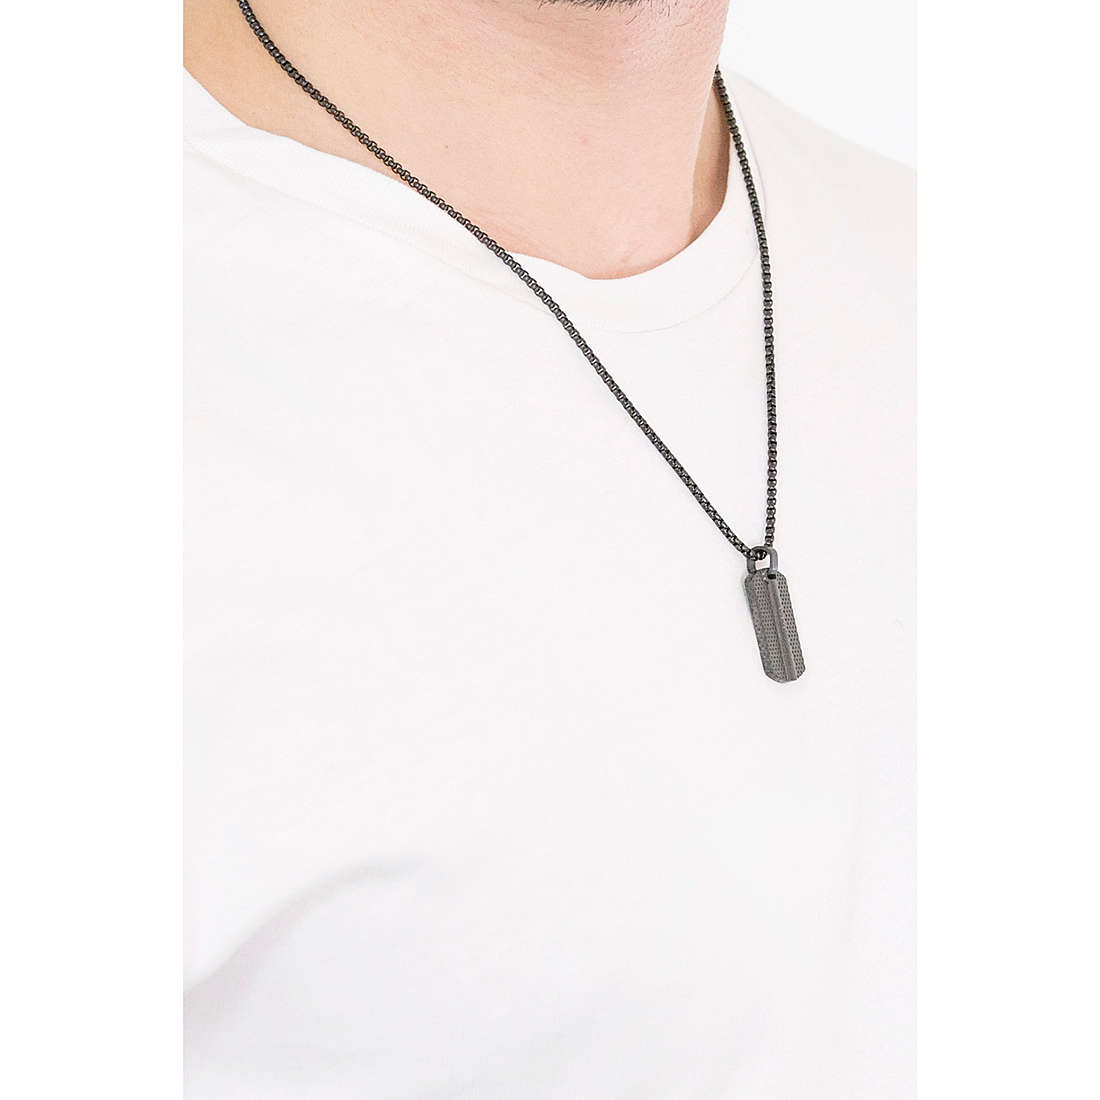 Guess necklaces man UMN28003 wearing